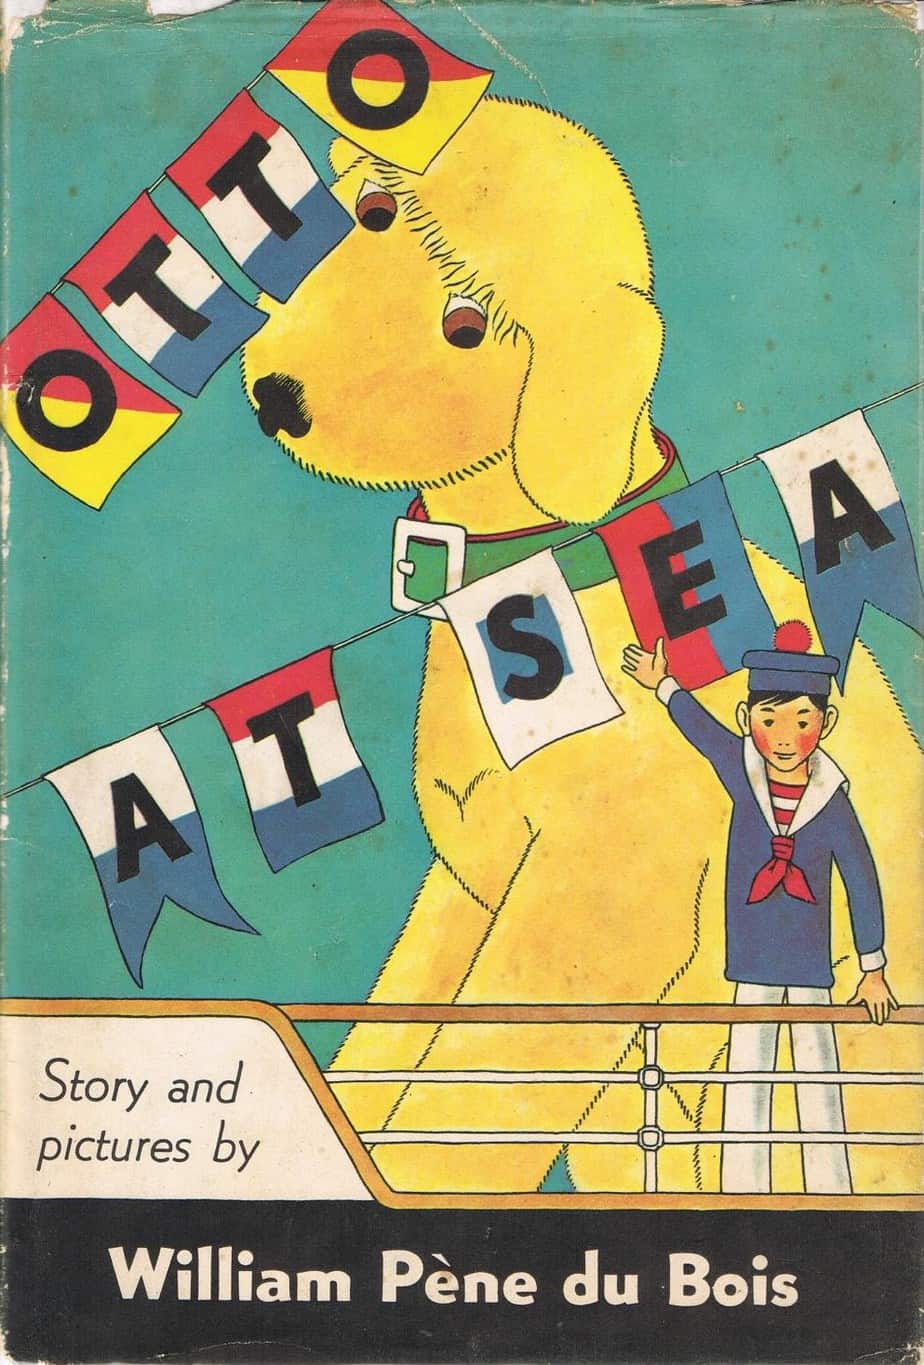 “Giant Otto” written and illustrated by William Pène du Bois starring a big yellow floppy dog